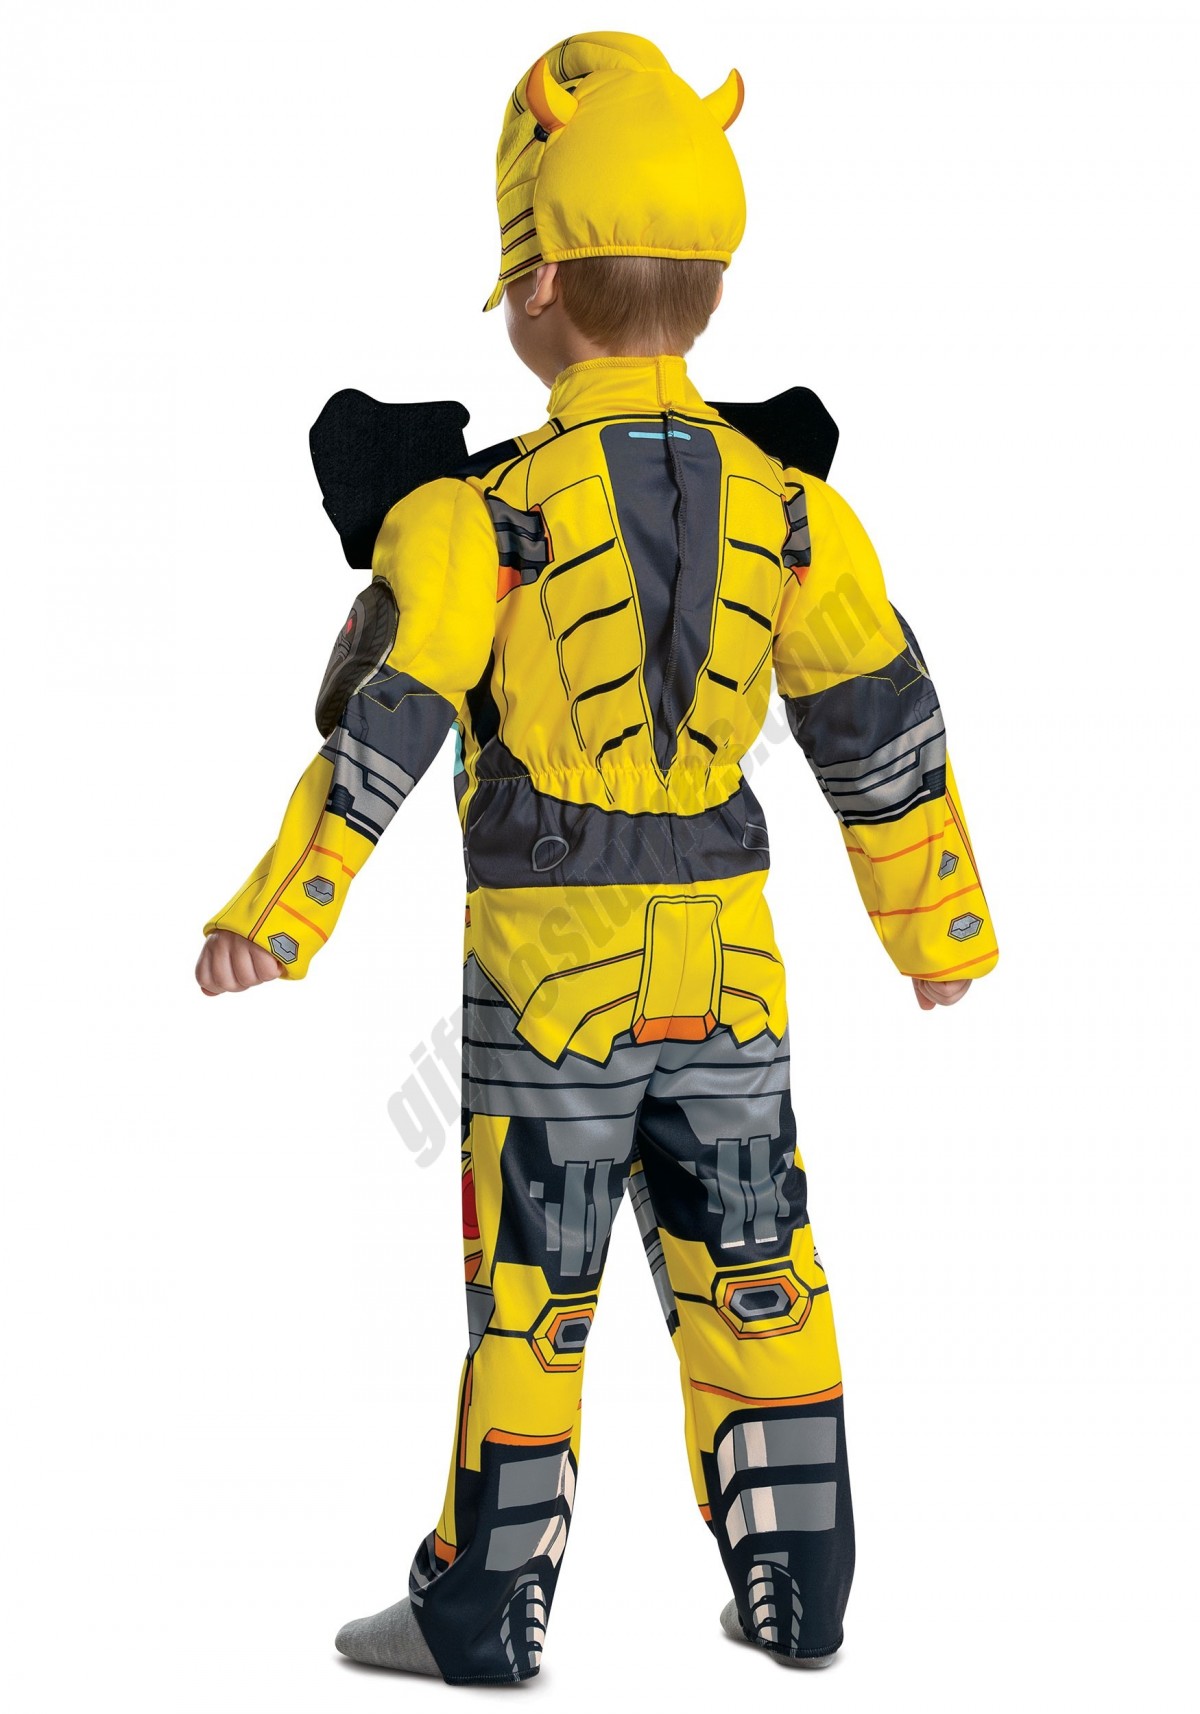 Transformers Muscle Bumblebee Costume for Toddlers Promotions - -1